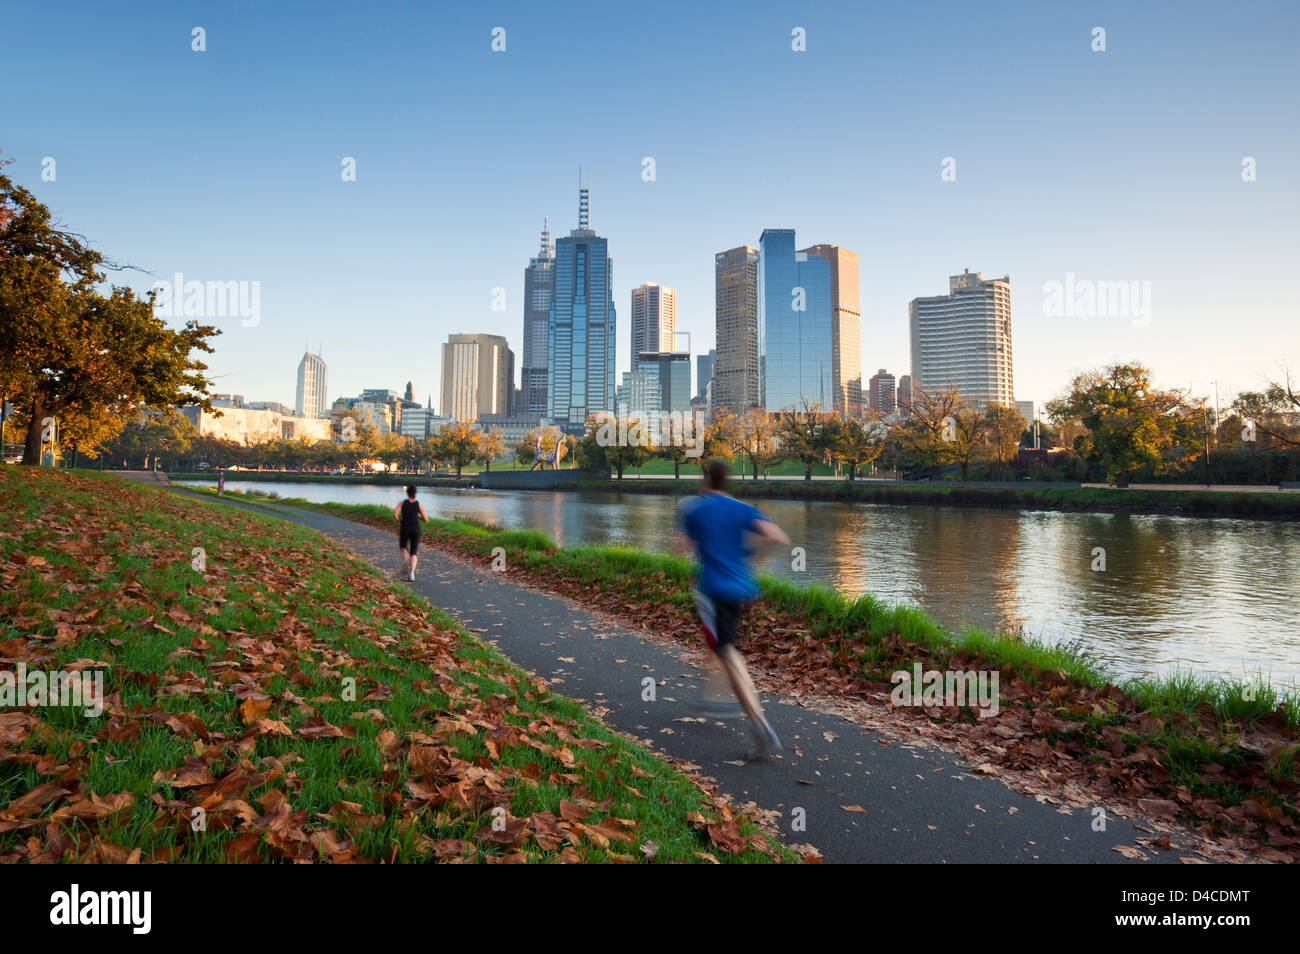 Joggers on banks of Yarra River with city skyline in background. Melbourne, Victoria, Australia Stock Photo